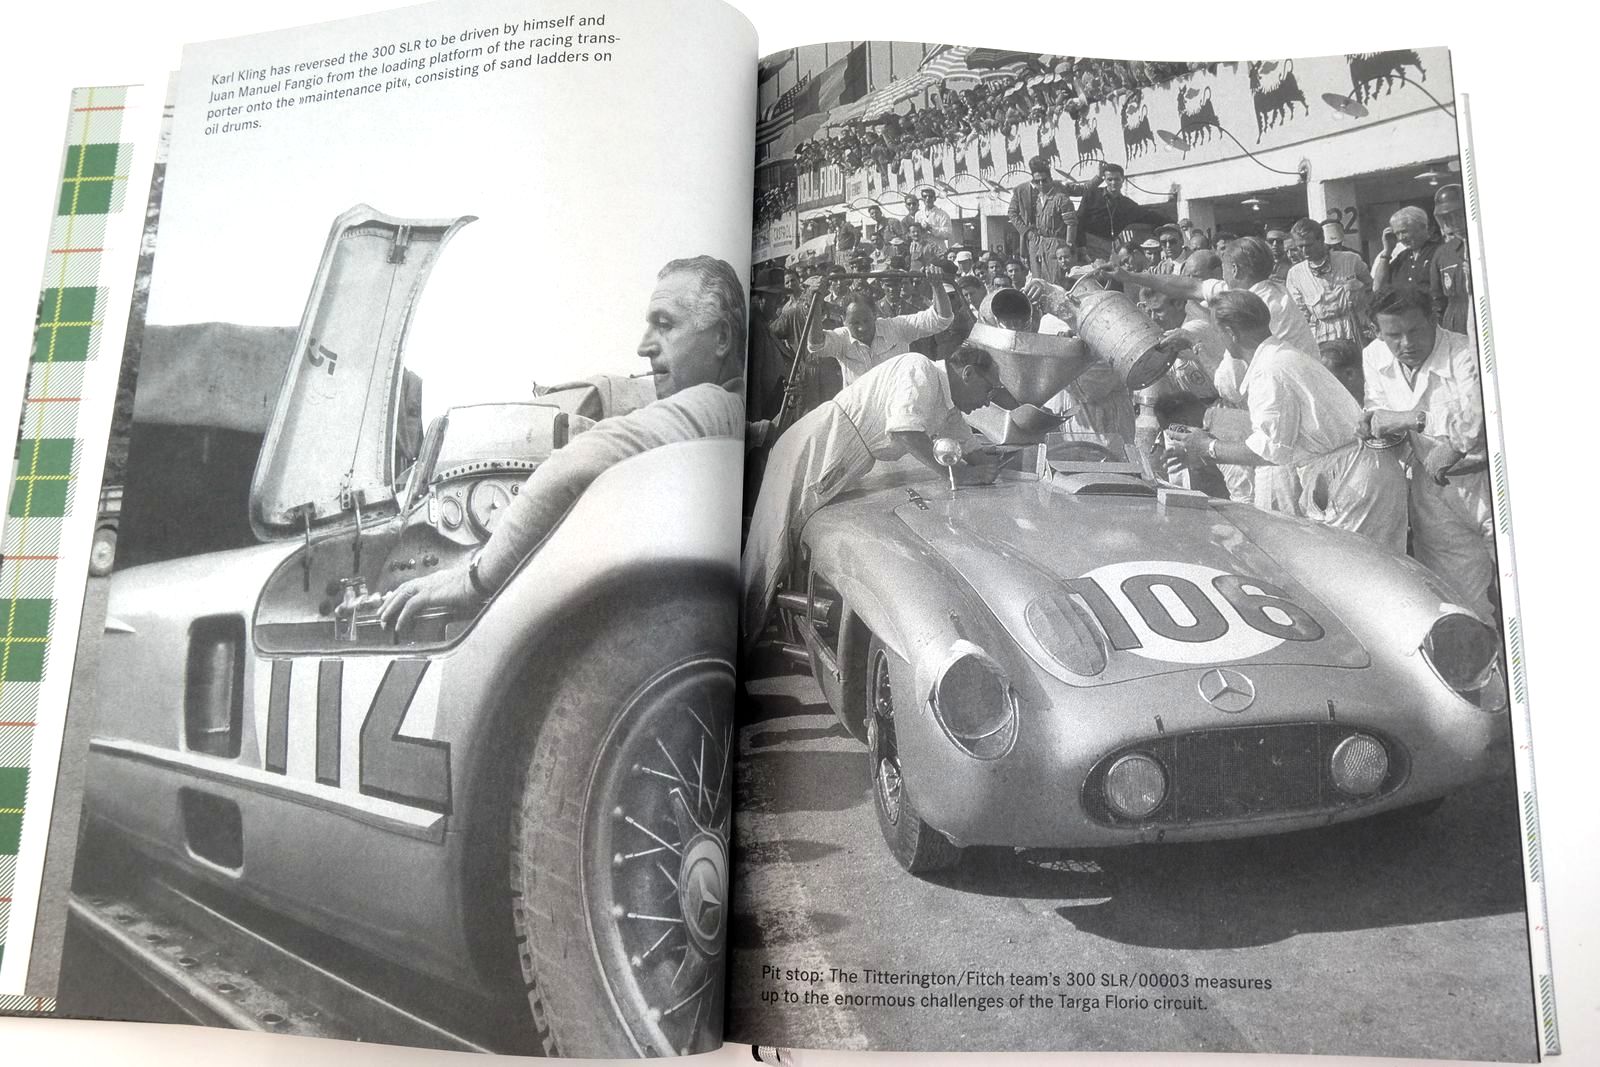 Photo of MILESTONES IN MOTORSPORTS: MERCEDES-BENZ 300 SLR written by Engelen, Gunter published by Hatje Cantz Verlag (STOCK CODE: 2137991)  for sale by Stella & Rose's Books